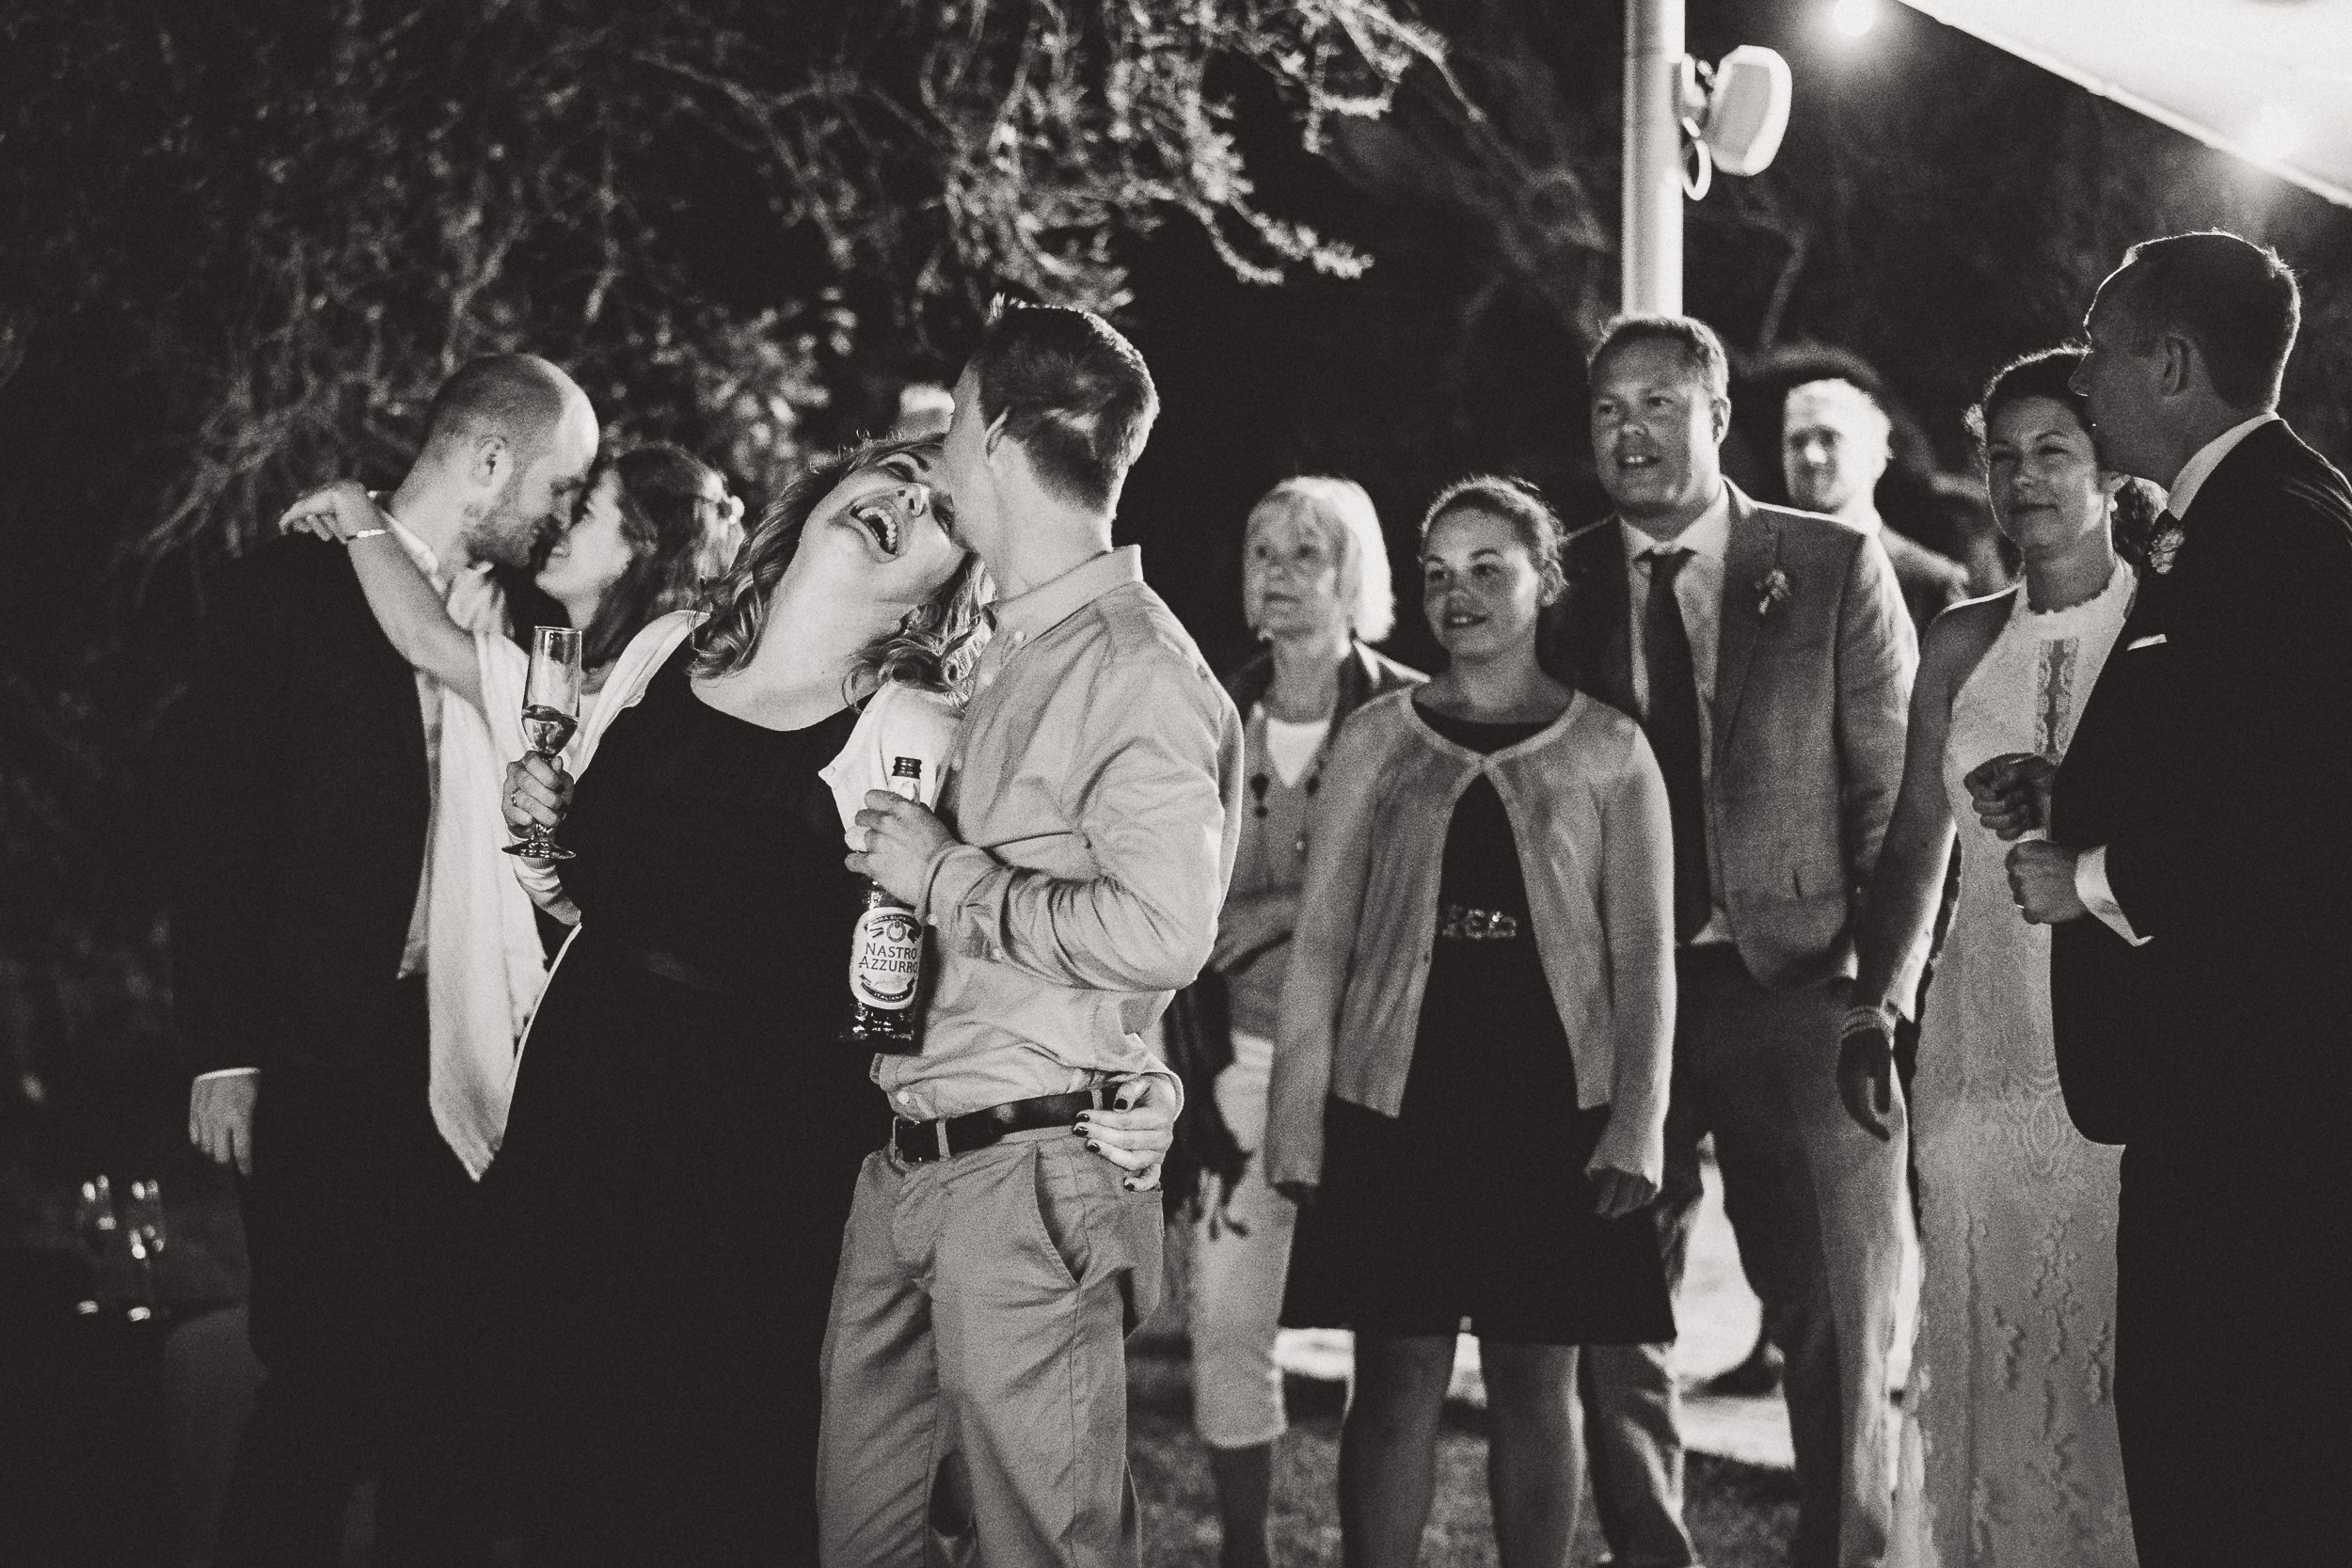 A black and white photo capturing a group of people at a wedding, including the bride and groom.